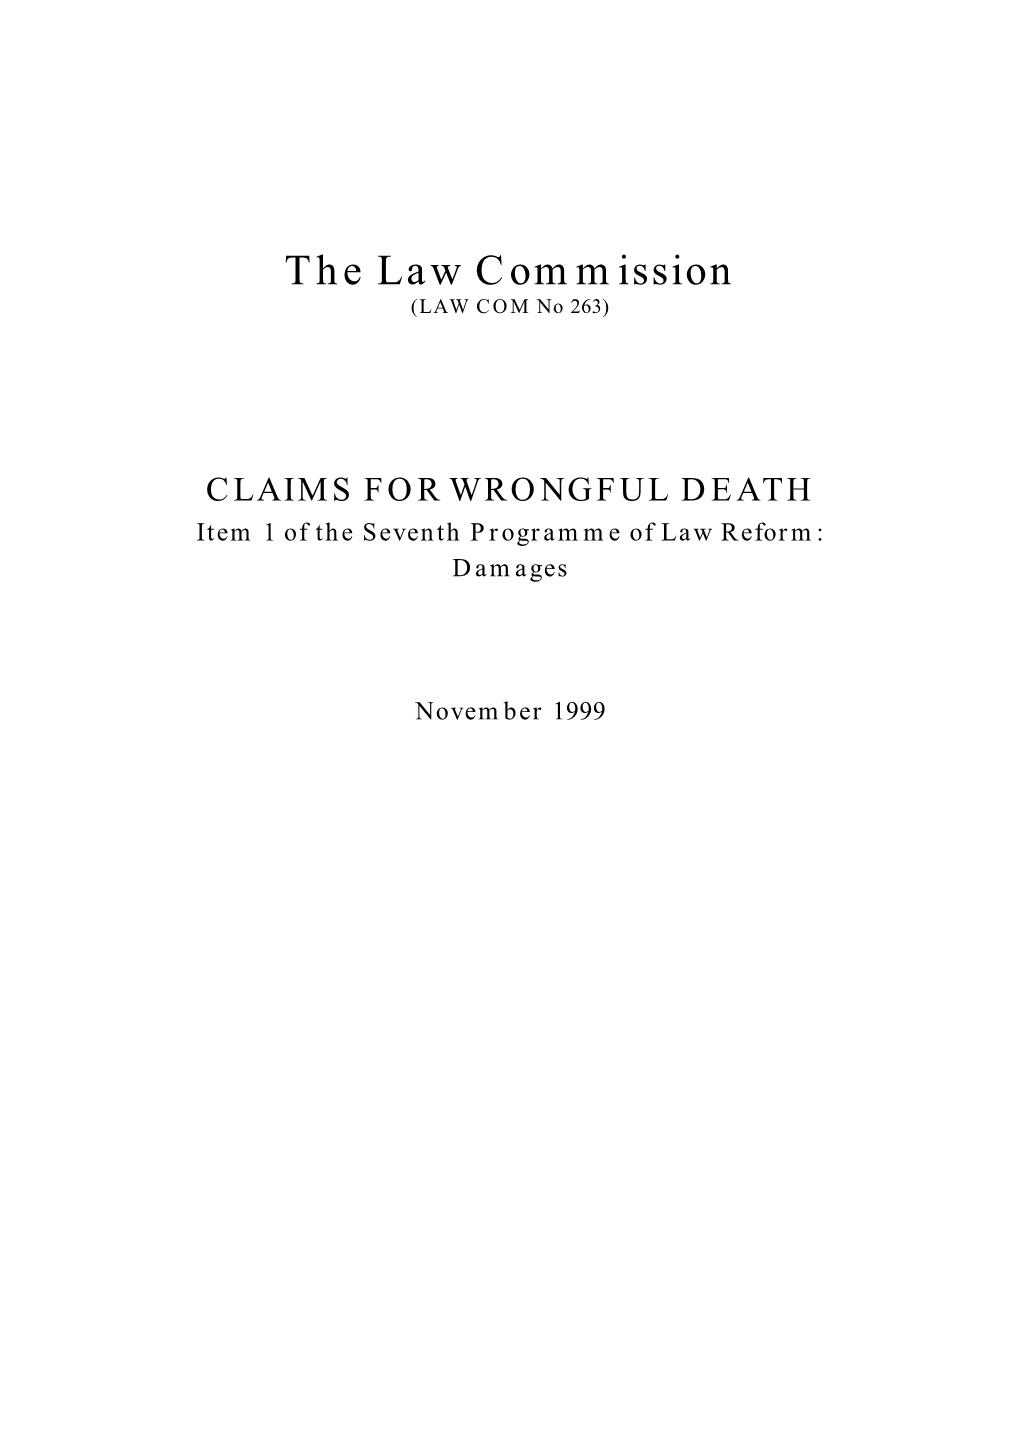 CLAIMS for WRONGFUL DEATH Item 1 of the Seventh Programme of Law Reform: Damages